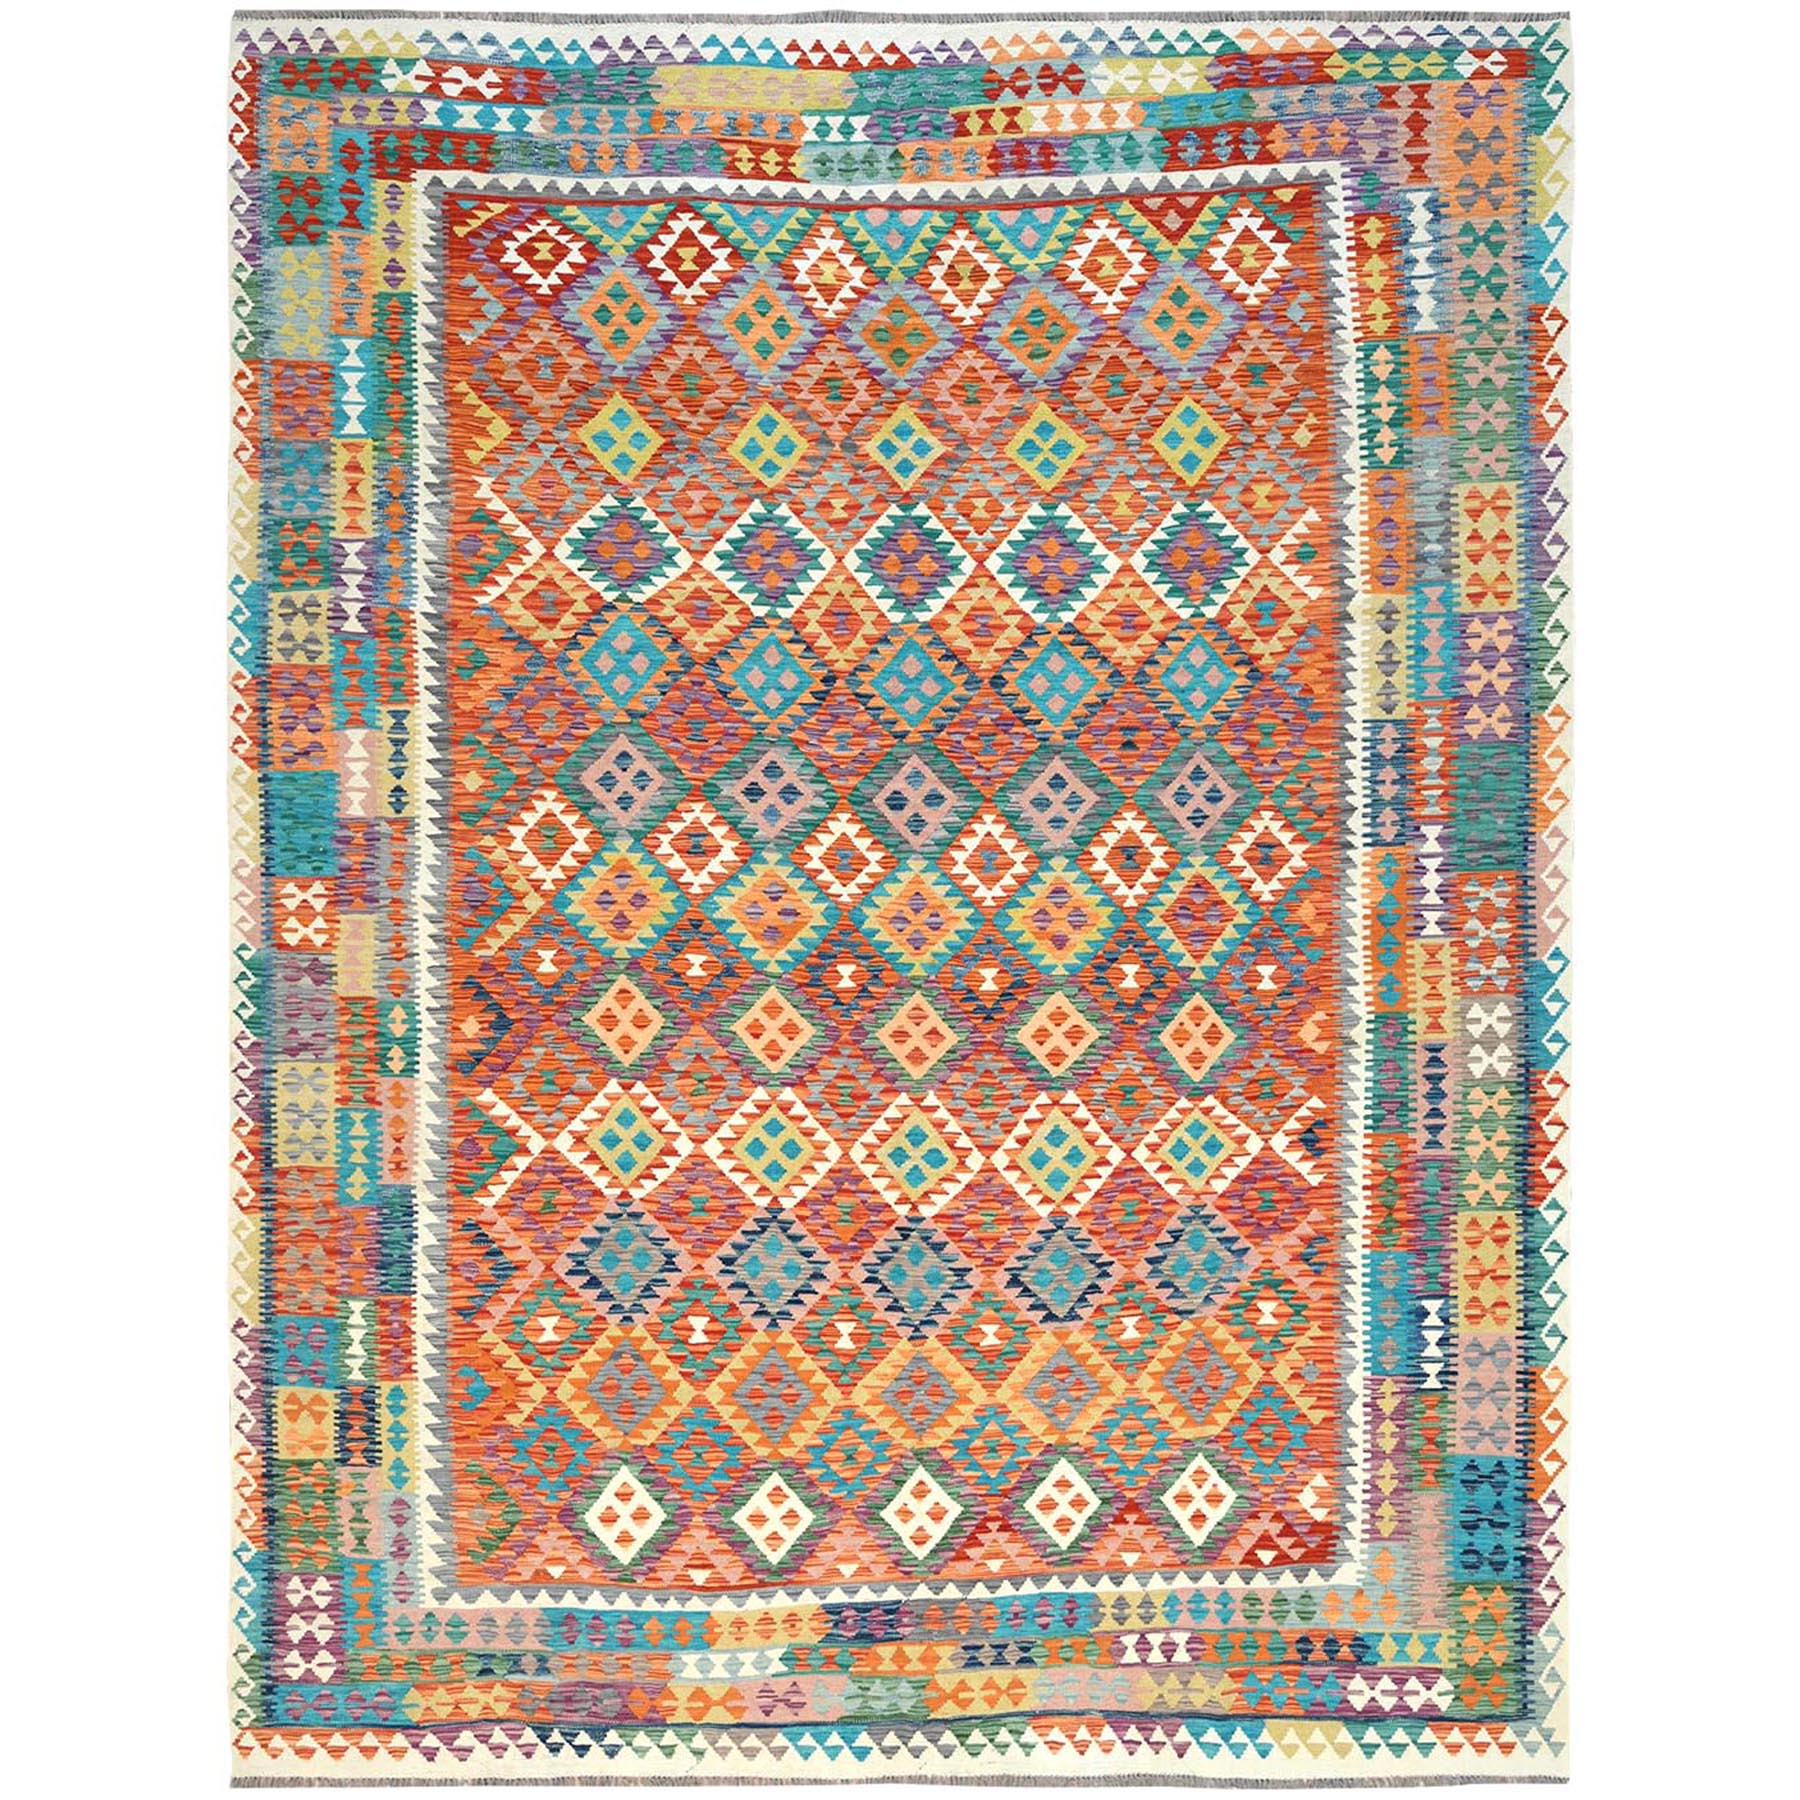 10'1"x13'2" Colorful, Hand Woven Afghan Kilim with Geometric Design, Flat Weave Veggie Dyes Pure Wool, Reversible Oriental Rug 